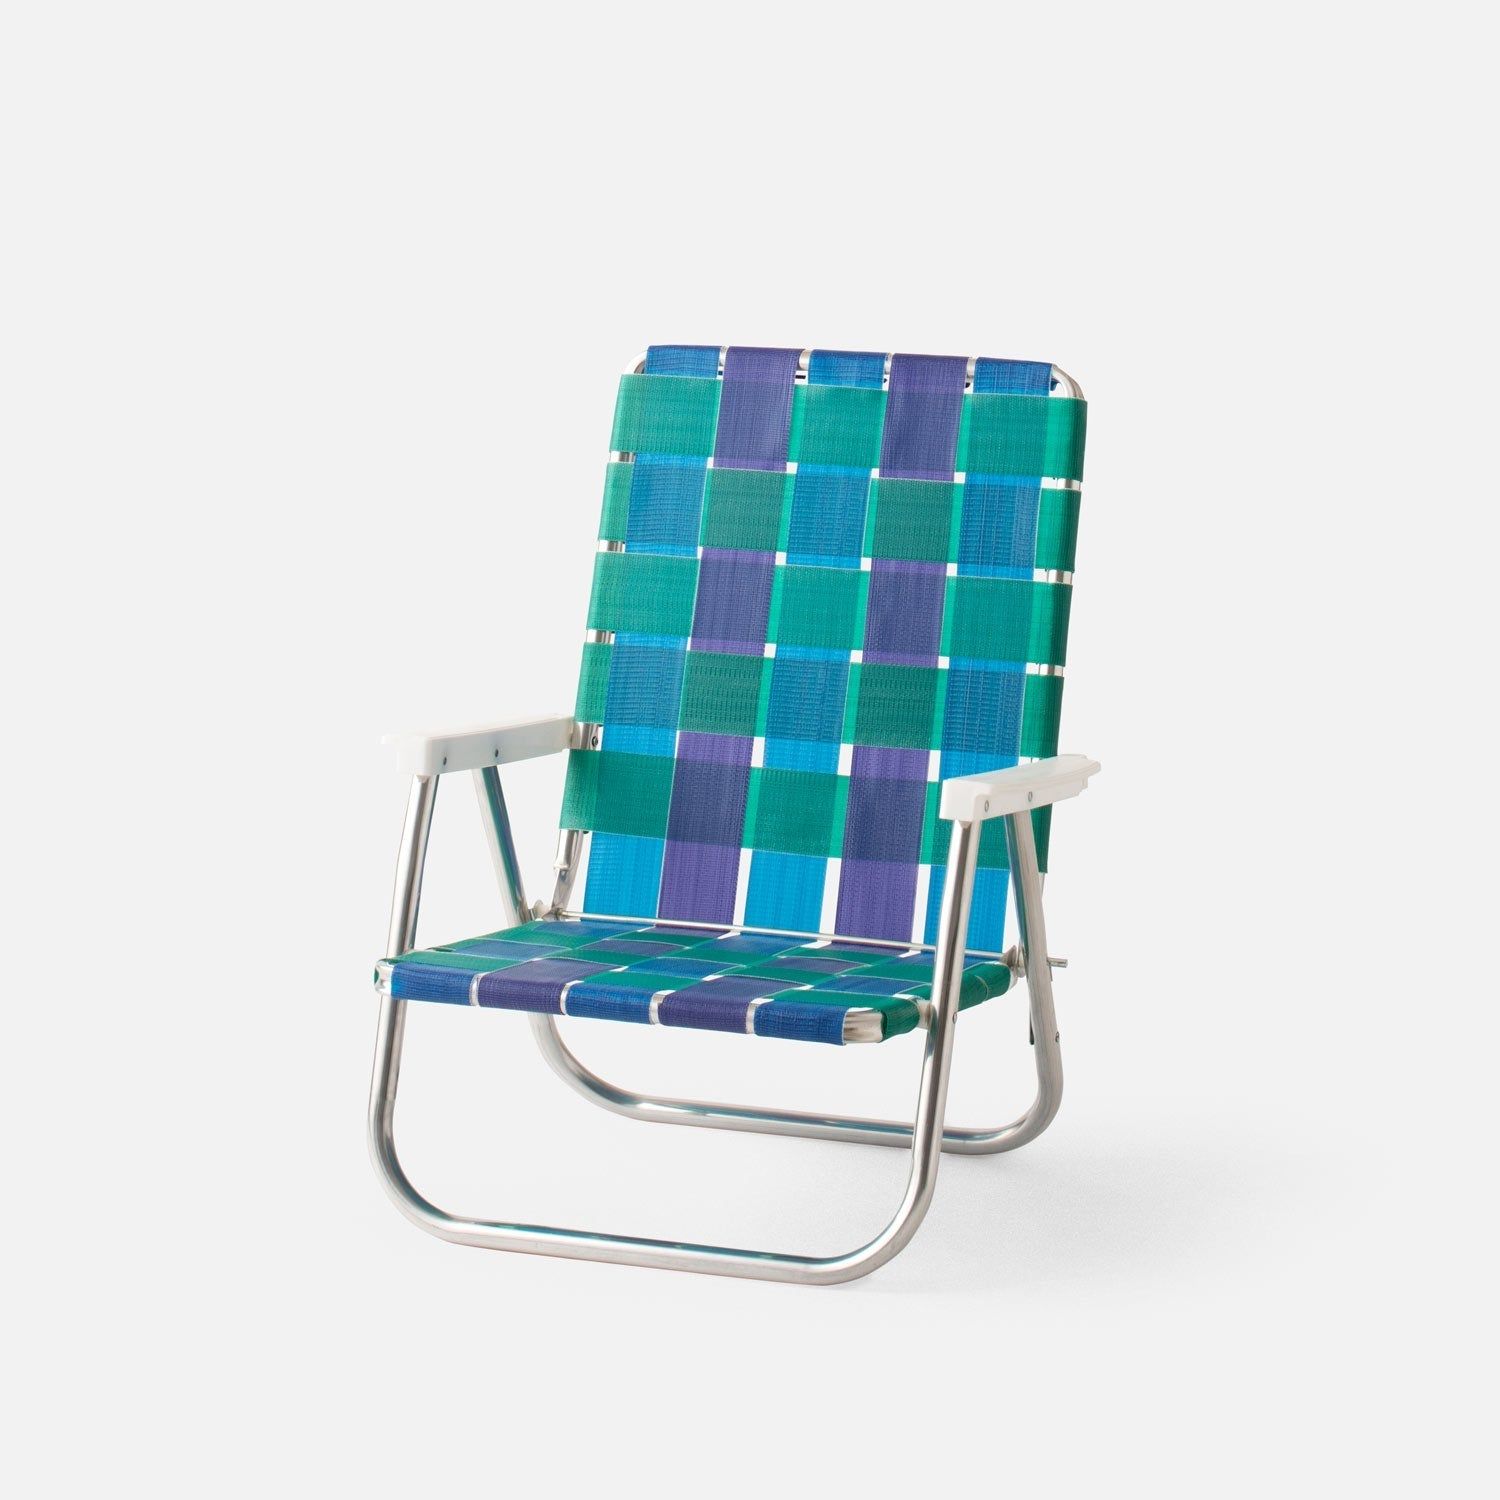 Stay Comfortable and Mobile with Lightweight Aluminum Folding Lawn Chairs